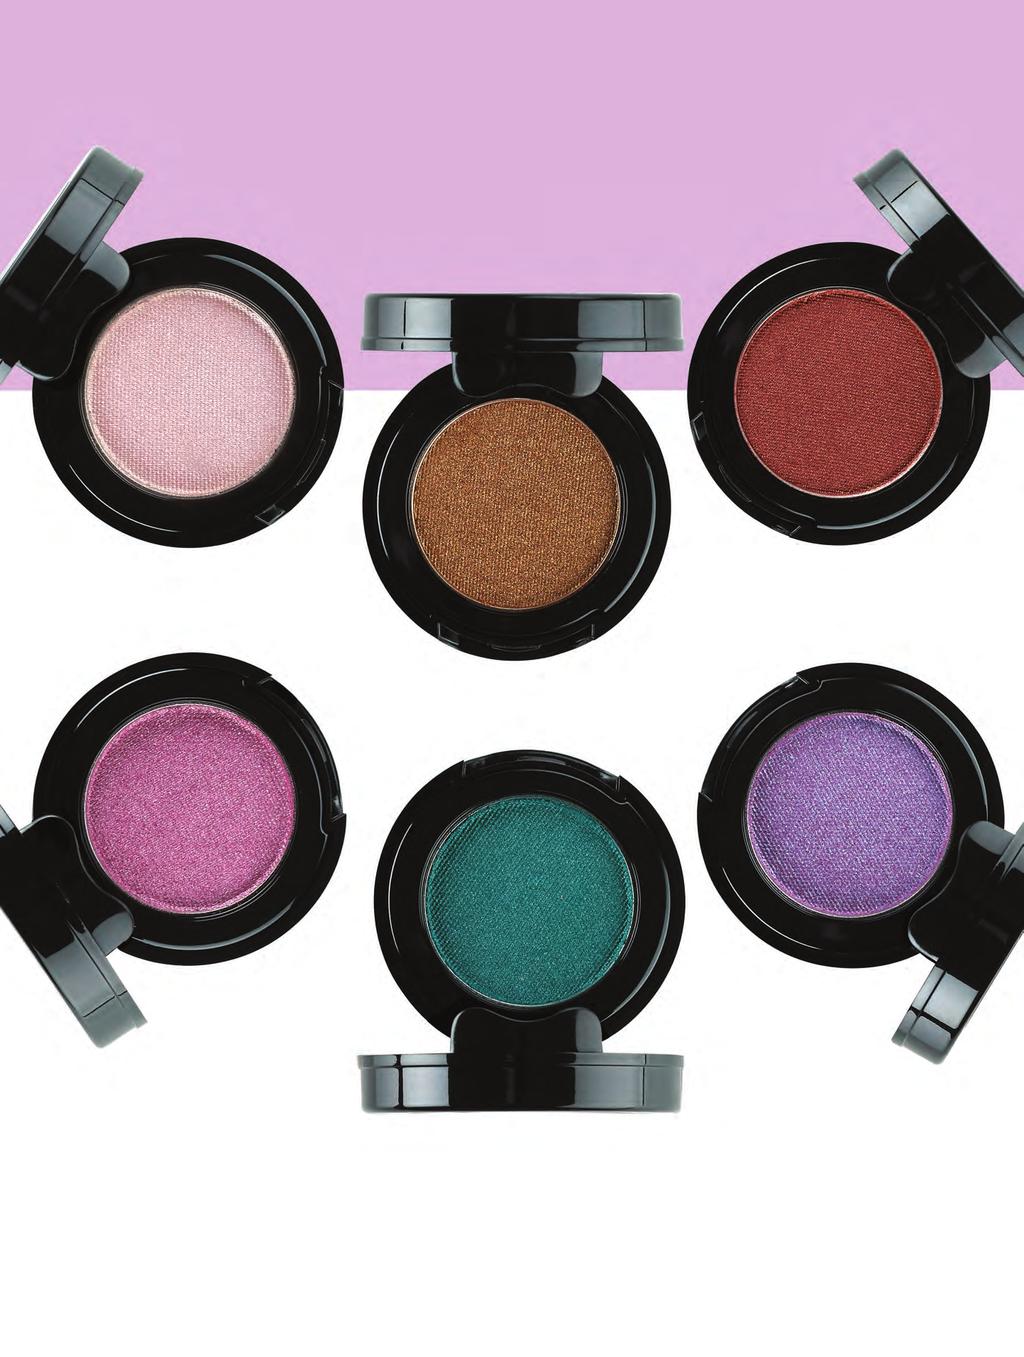 Metallic Velvet Shadows These shadows are here to shine! Soft, velvety texture glides on in one swipe.